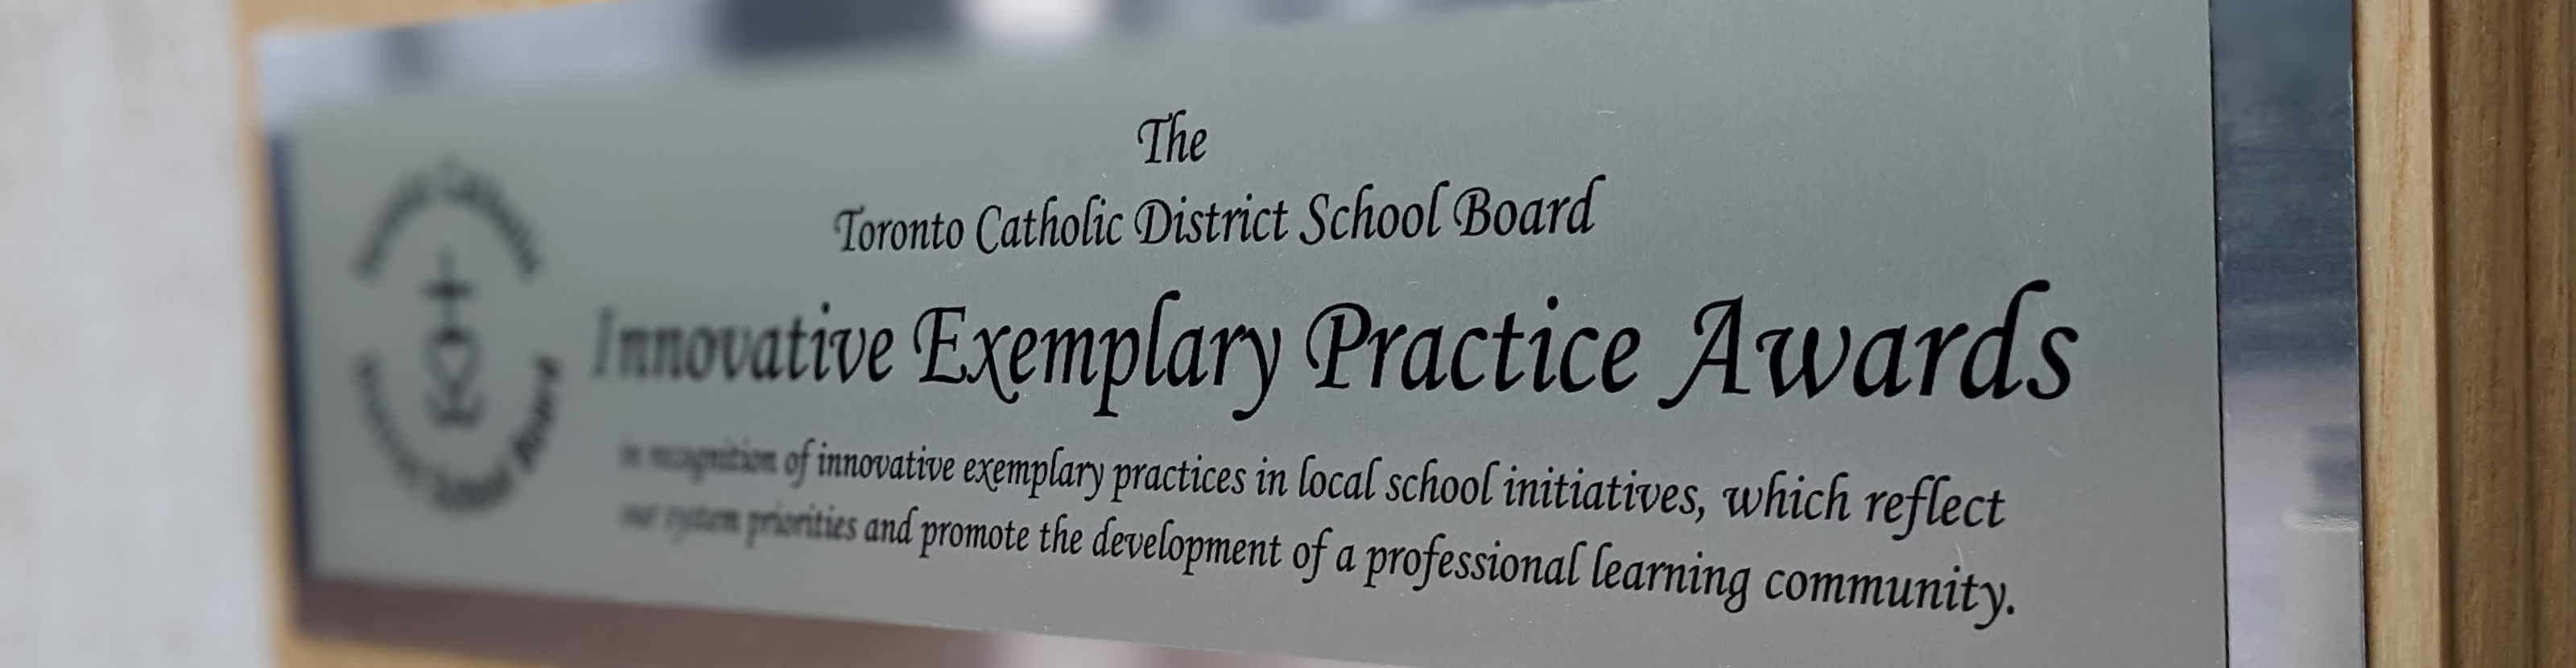 Photo of the Innovative Exemplary Practice Awards  plaque hung on a wall.